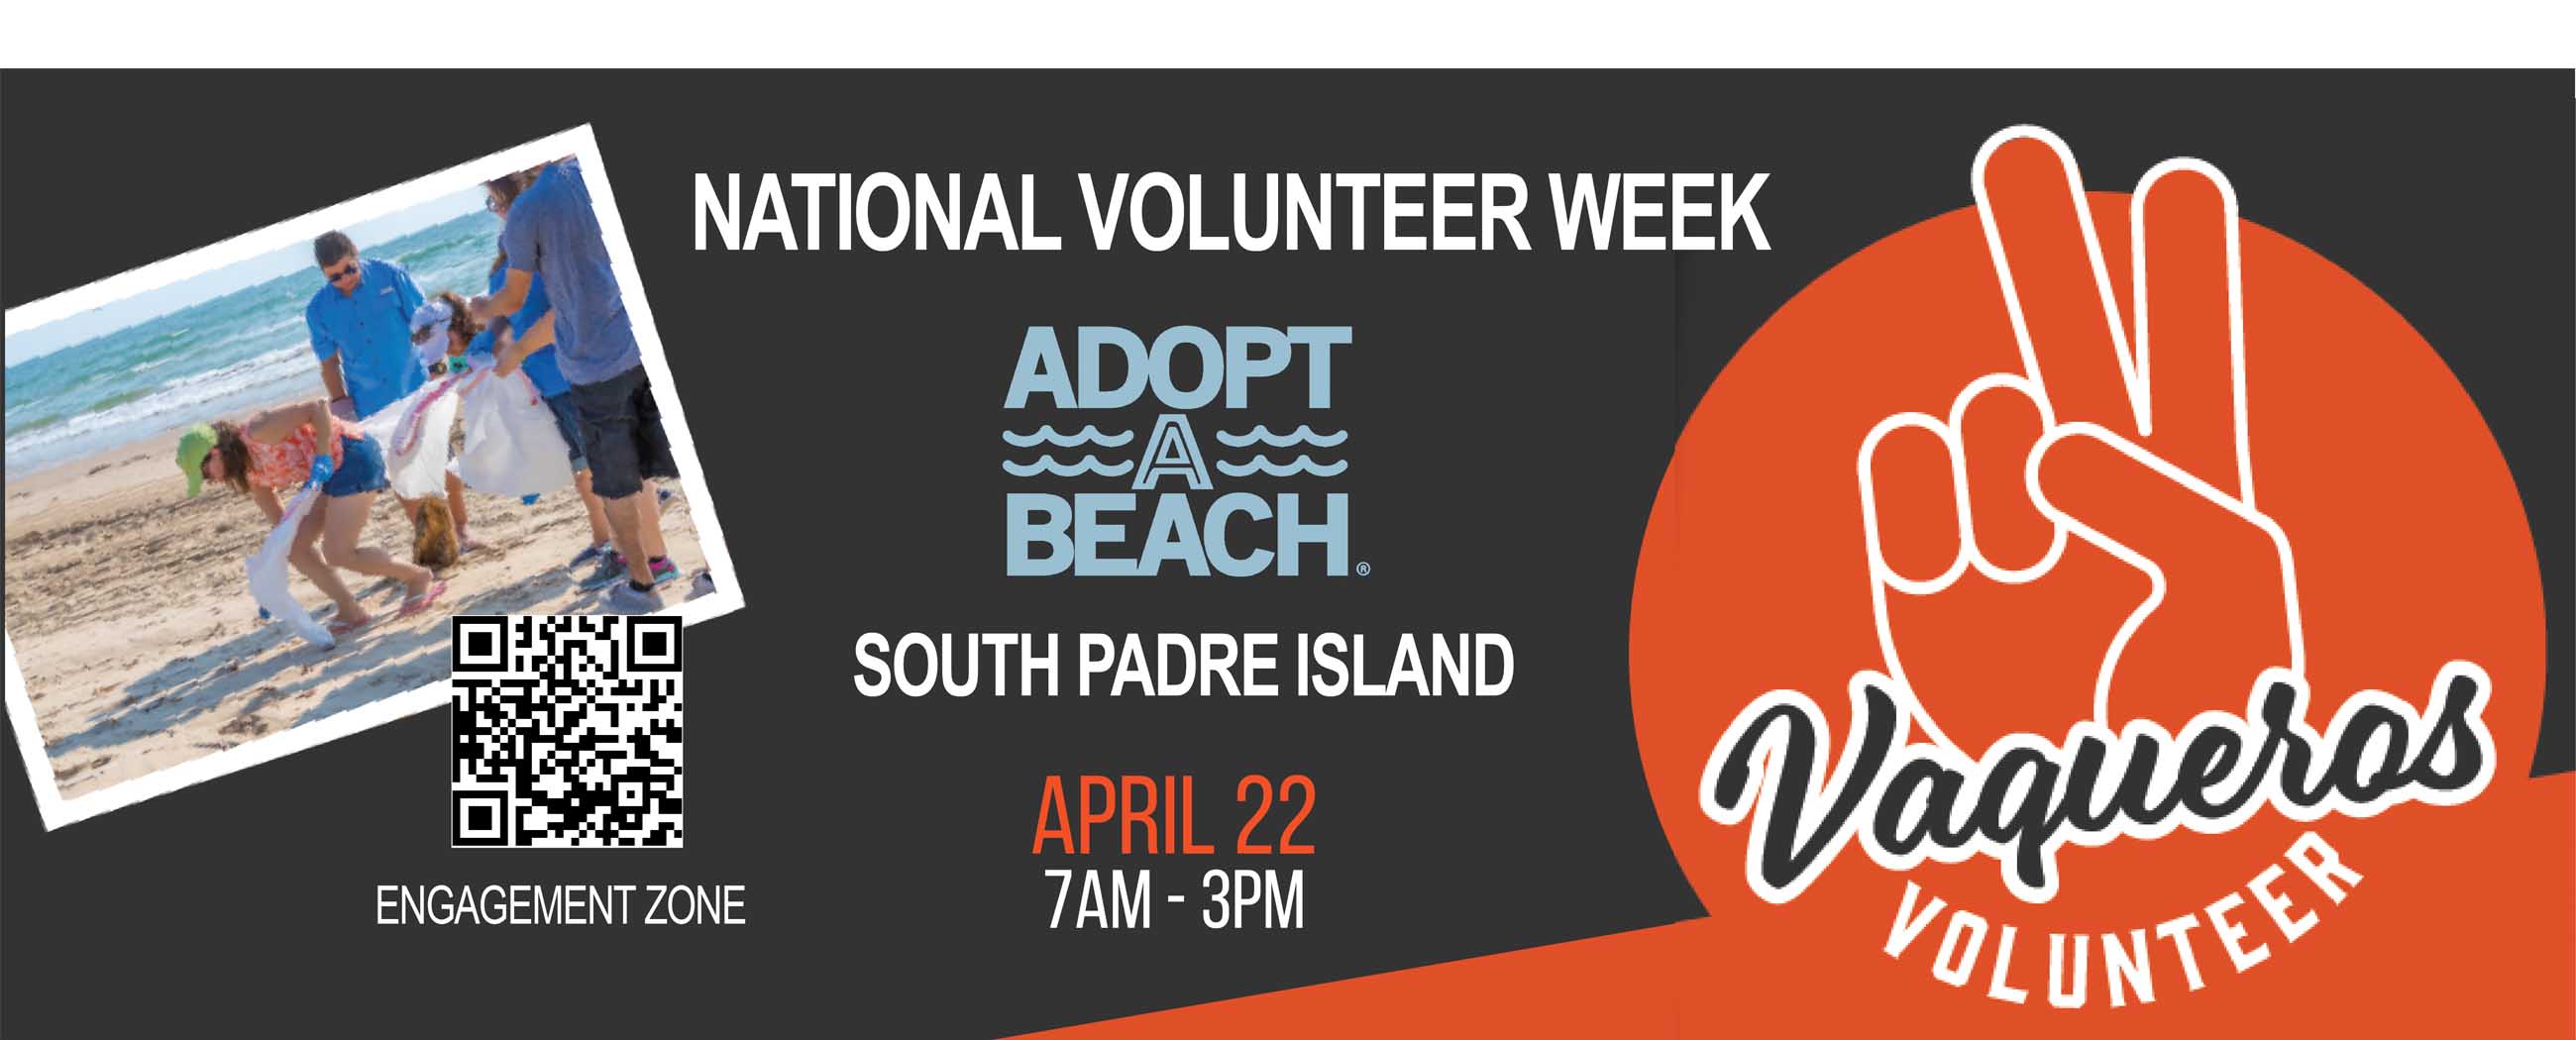 National Volunteer Week. Adopt A Beach South Padre Island. April 22 From 7AM - 3PM. Vaqueros Volunteer Page Banner 